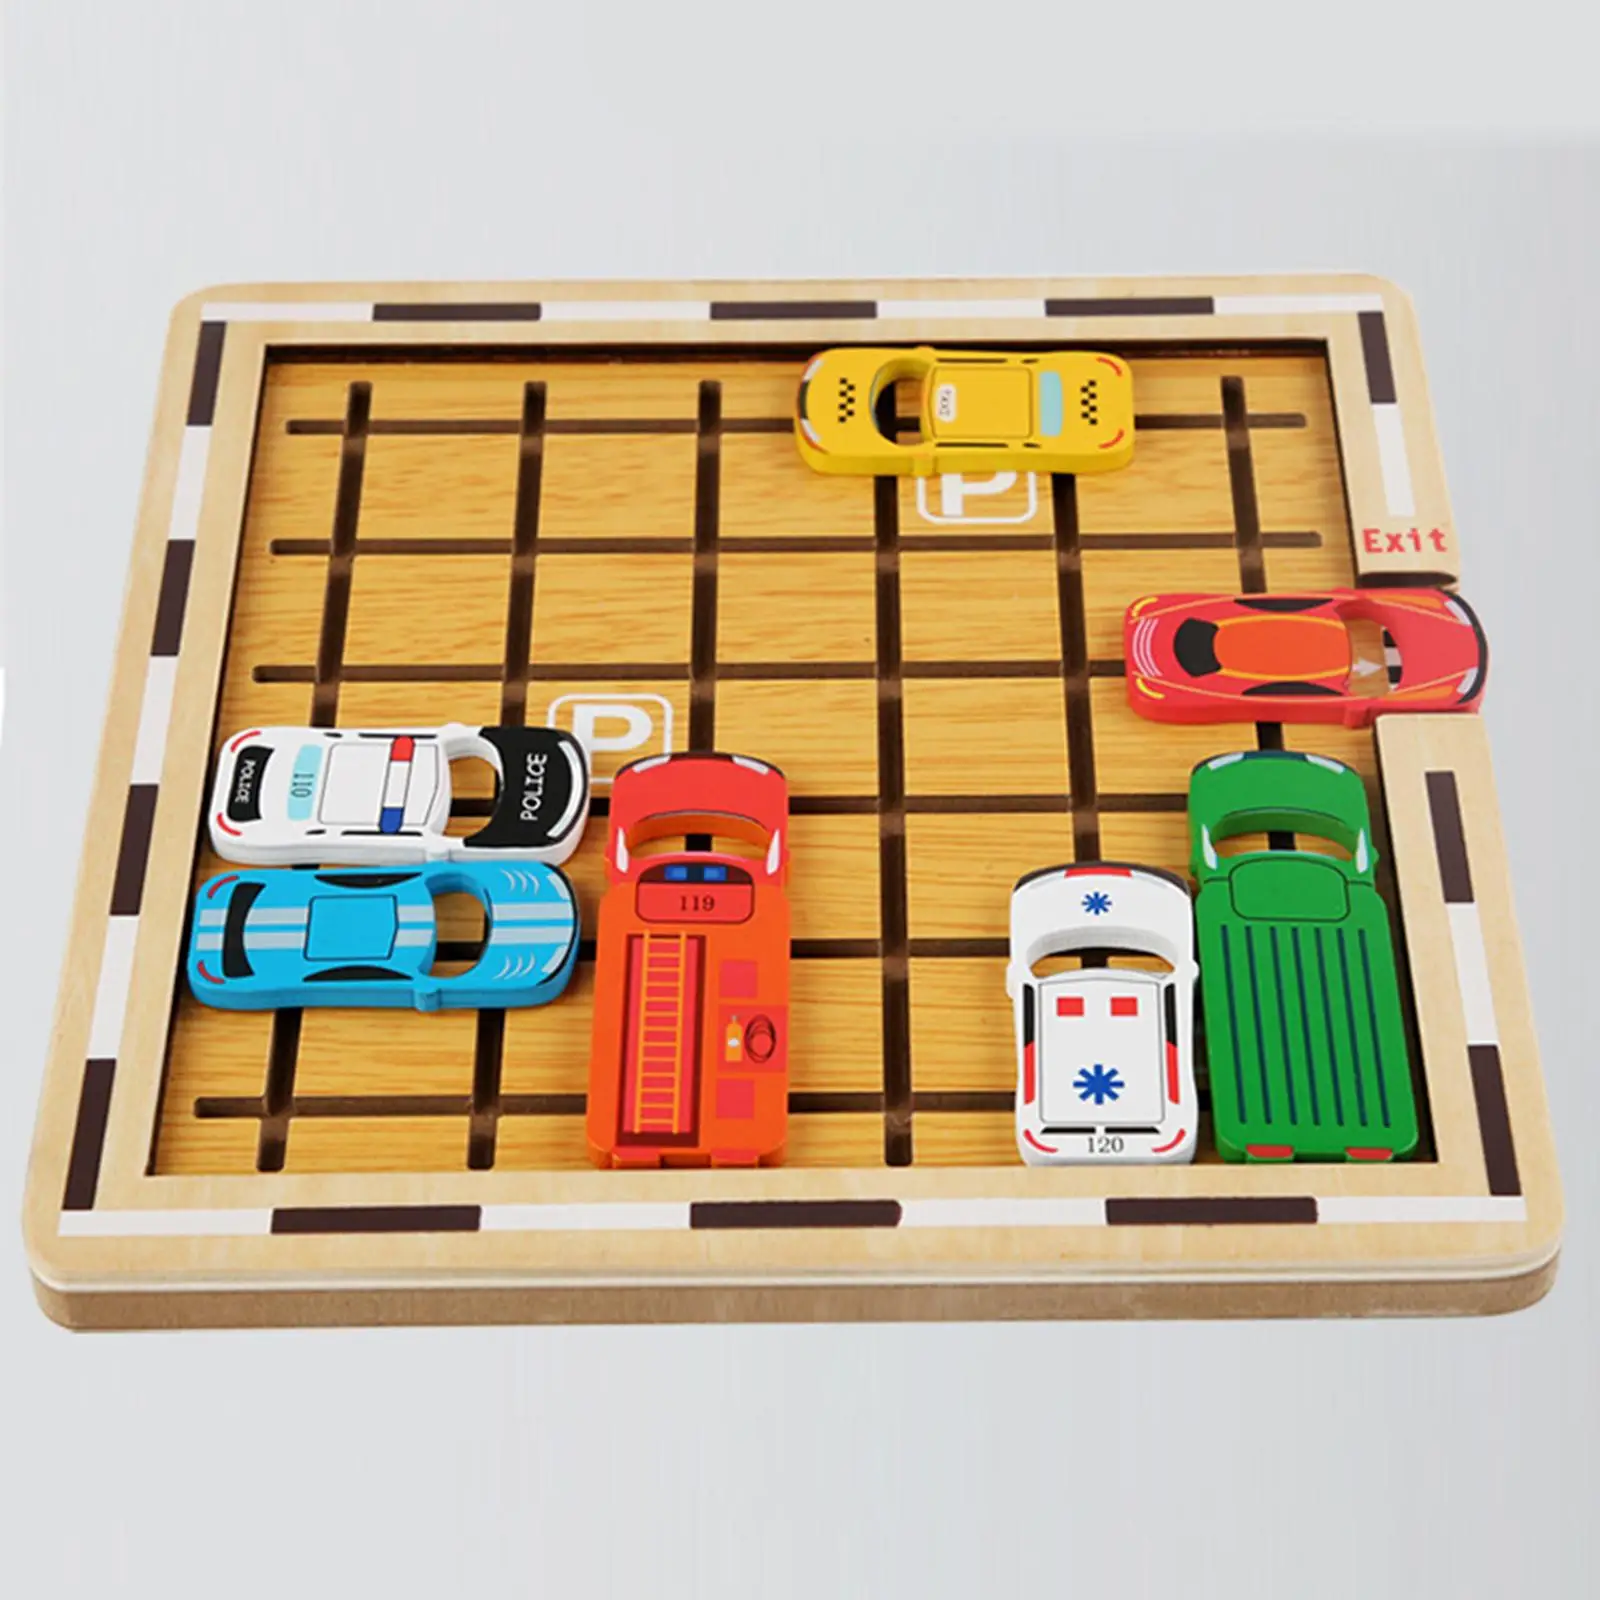 Wooden Early Education Car Sensory Toy Logical Thinking Training Educational Toys Fine Motor Skills for Toddlers Boys Kids Gifts